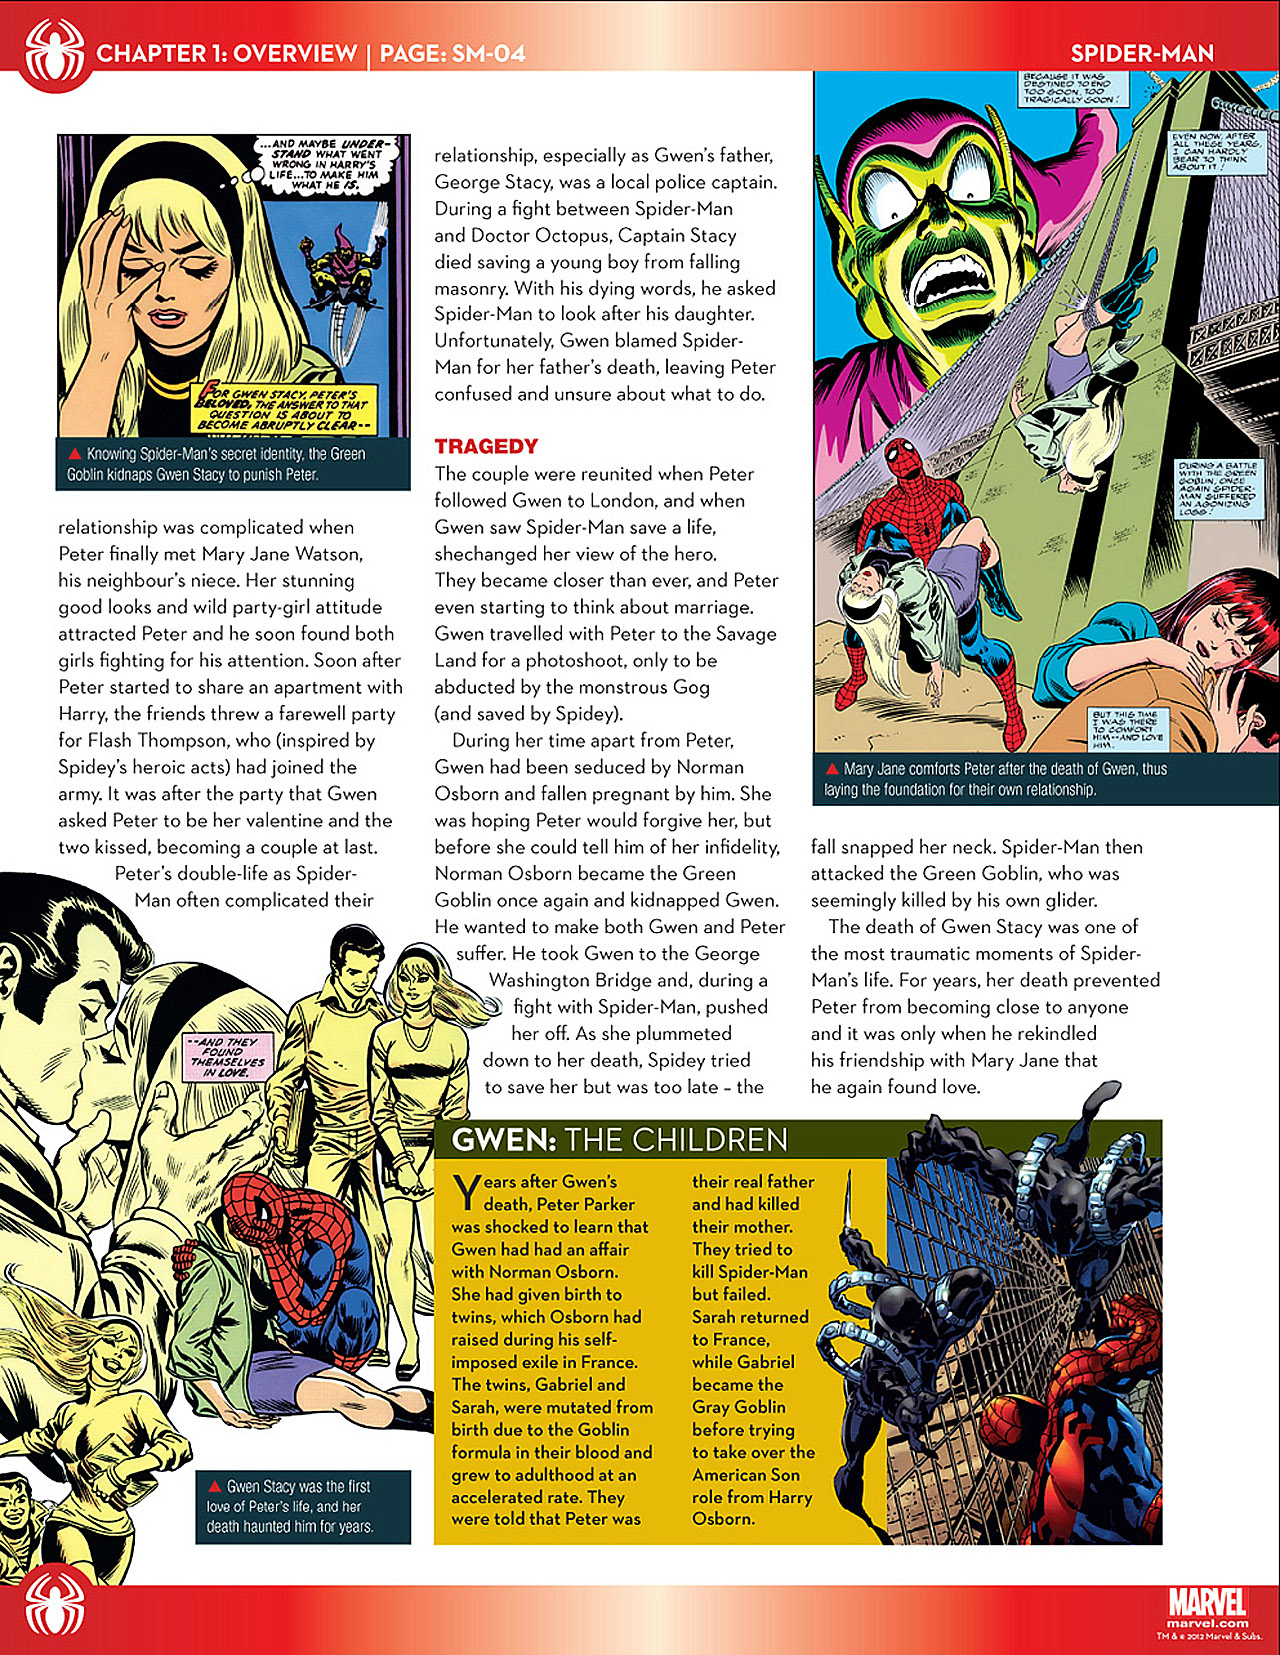 Read online Marvel Fact Files comic -  Issue #2 - 6